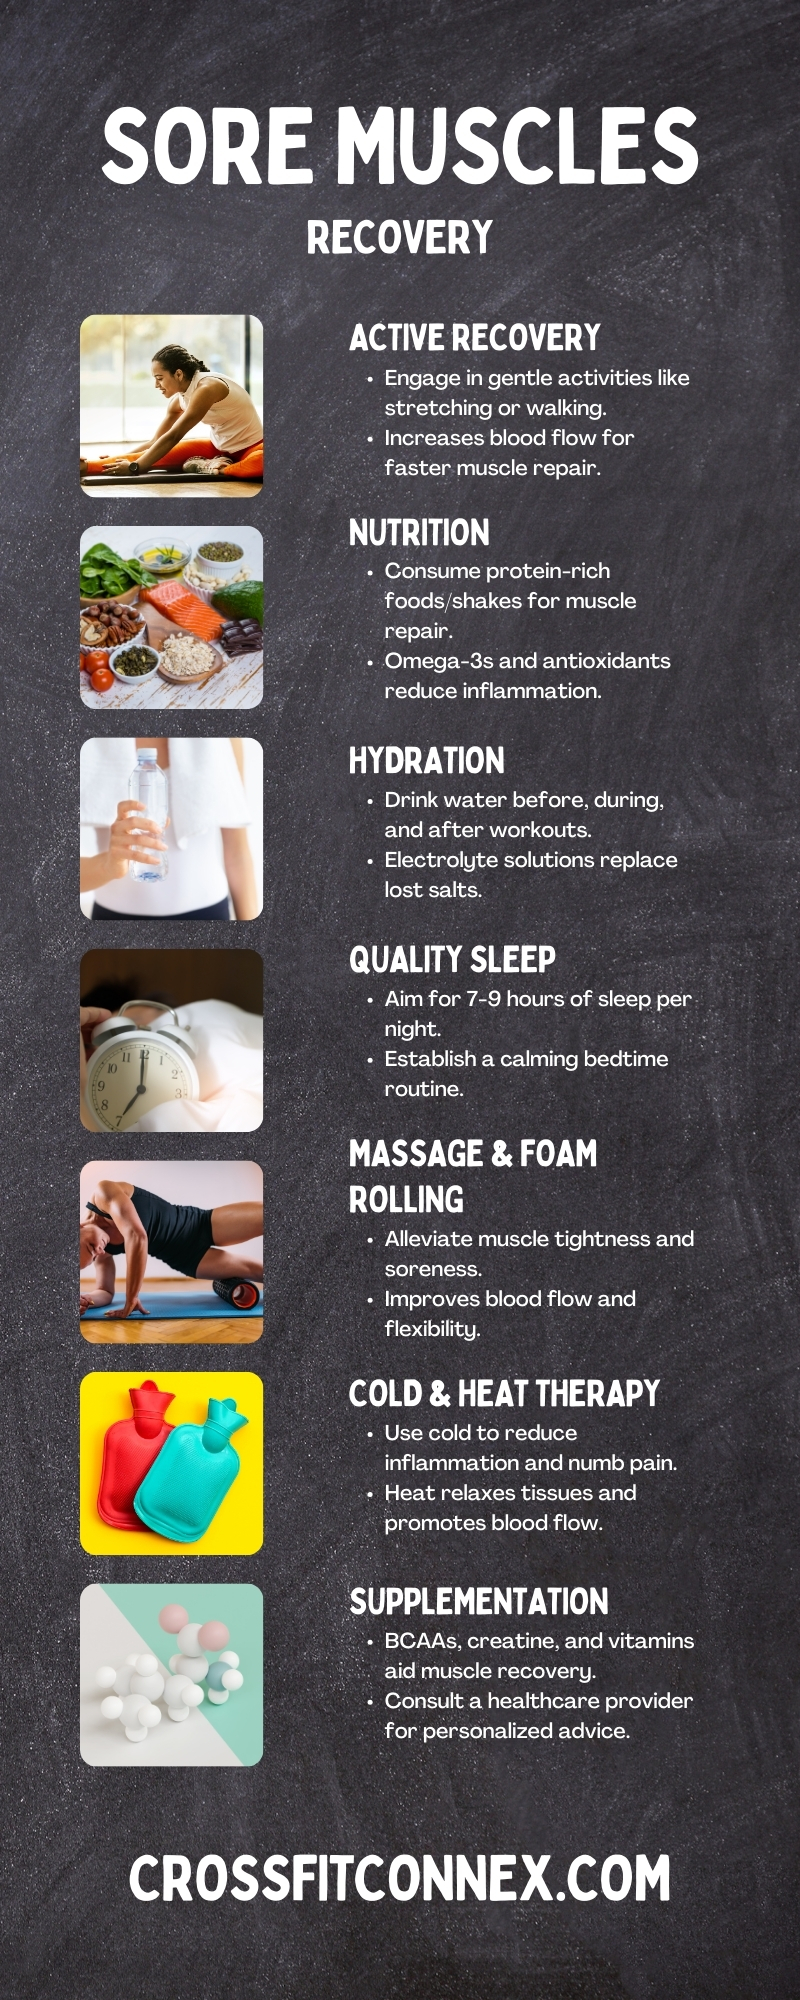 Recovery of Sore Muscles Infographic